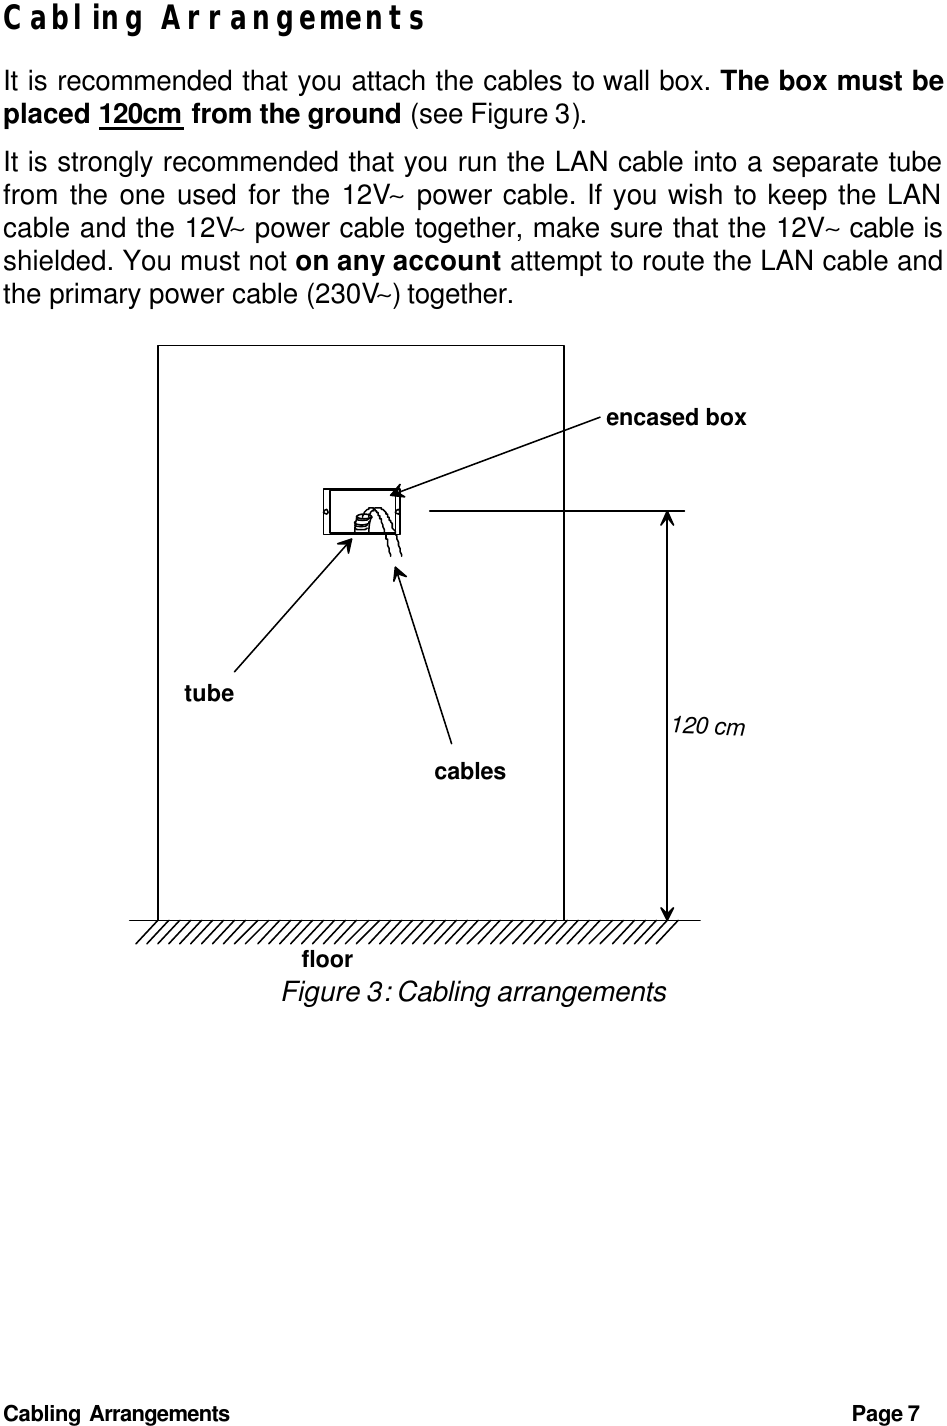 Cabling Arrangements Page 7 Cabling Arrangements It is recommended that you attach the cables to wall box. The box must be placed 120cm from the ground (see Figure 3). It is strongly recommended that you run the LAN cable into a separate tube from the one used for the 12V∼ power cable. If you wish to keep the LAN cable and the 12V∼ power cable together, make sure that the 12V∼ cable is shielded. You must not on any account attempt to route the LAN cable and the primary power cable (230V∼) together.  encased boxtubecablesfloor120 cm Figure 3: Cabling arrangements 